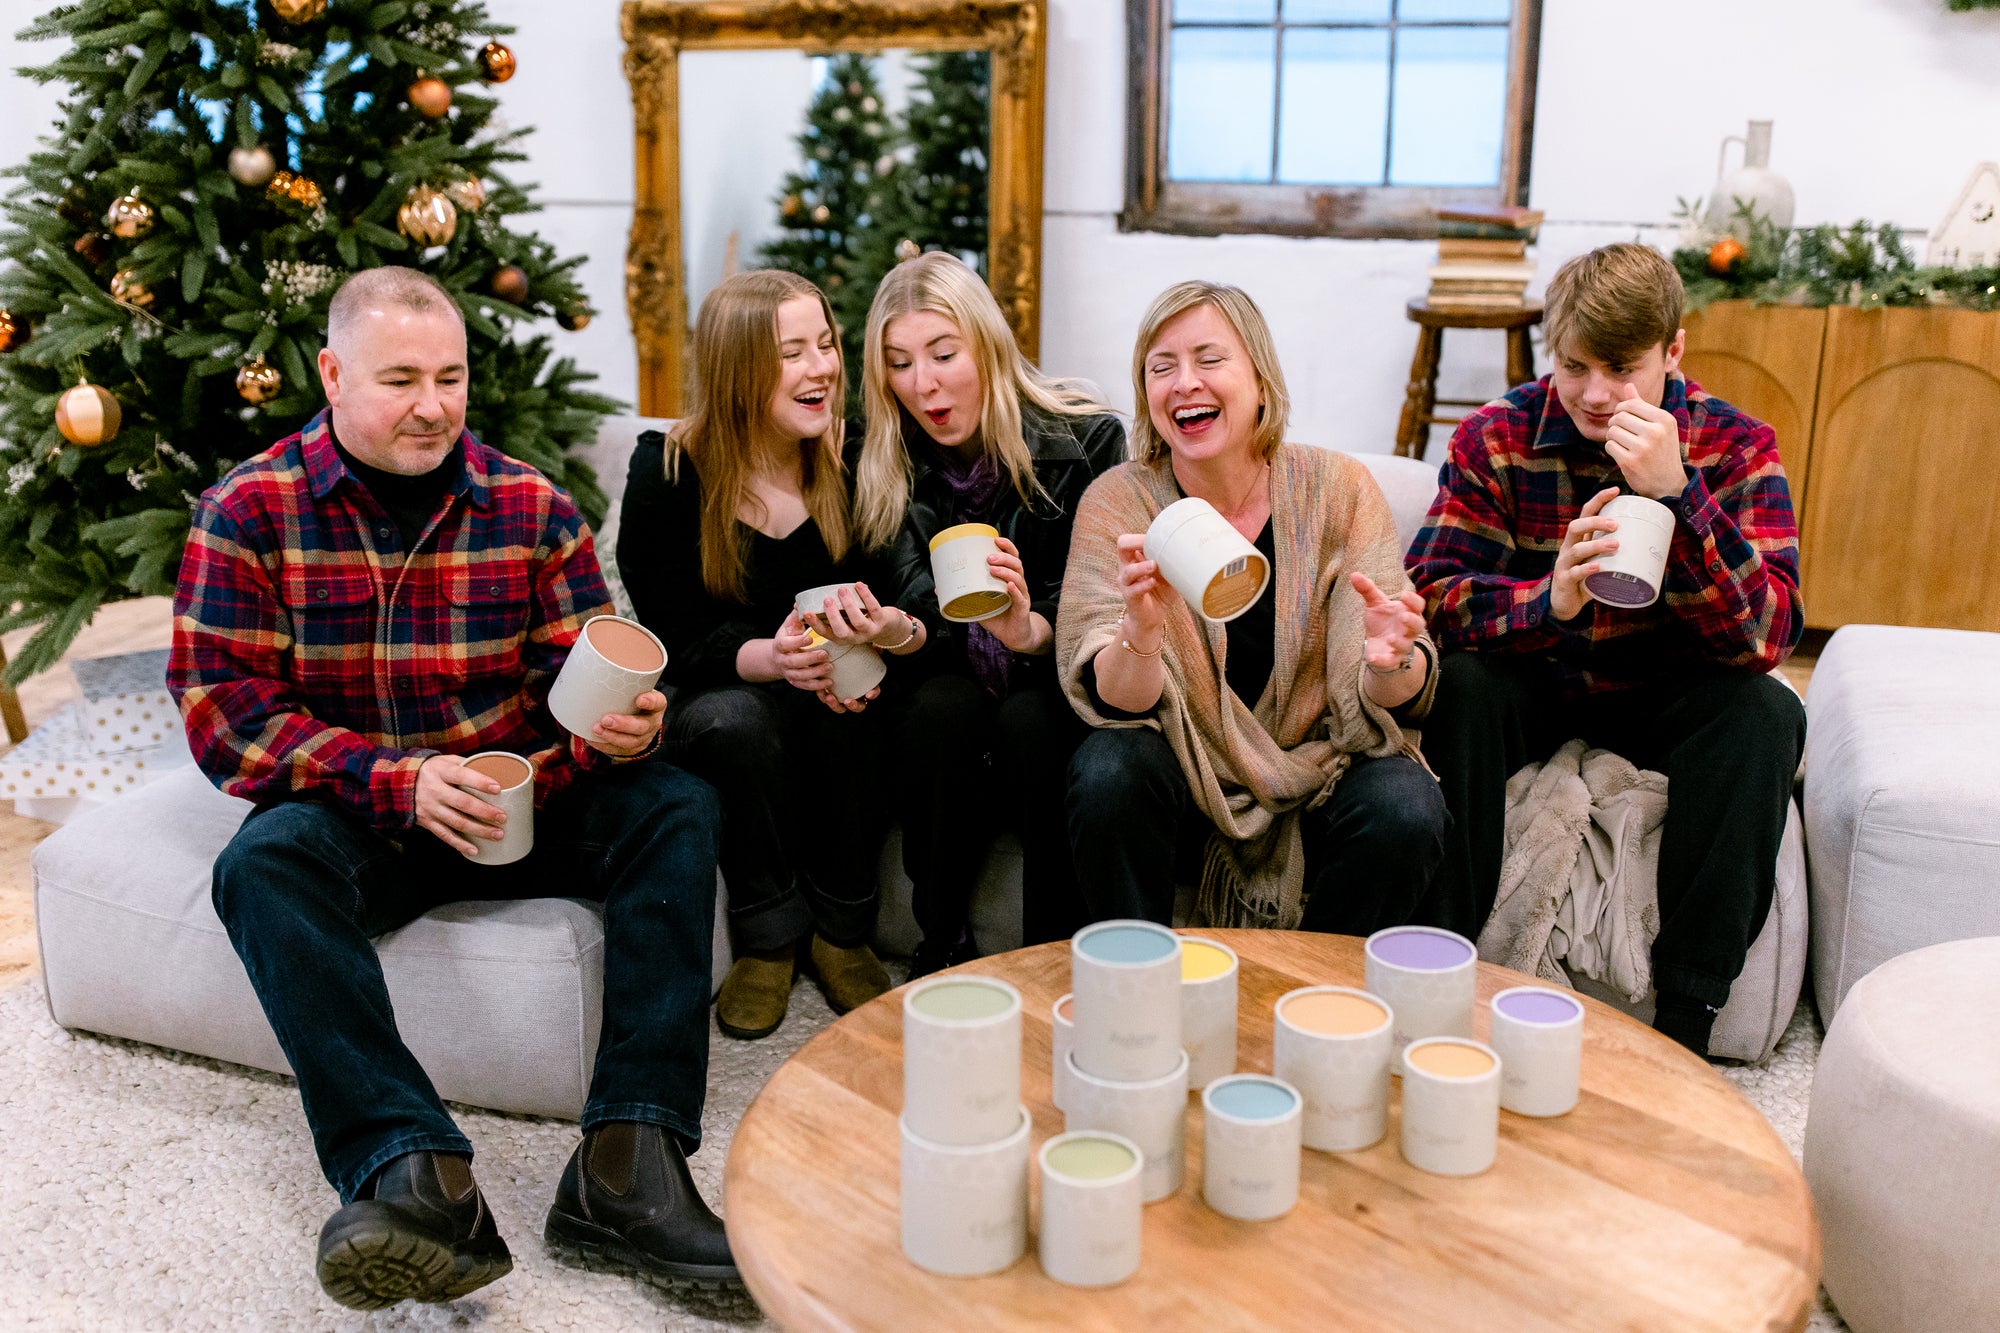 Green Ash's Owner with her family sitting on a couch, with the Green Ash candles in kraft tubes on the table. Each family member is holding 1 or 2 candles each, smiling and laughing